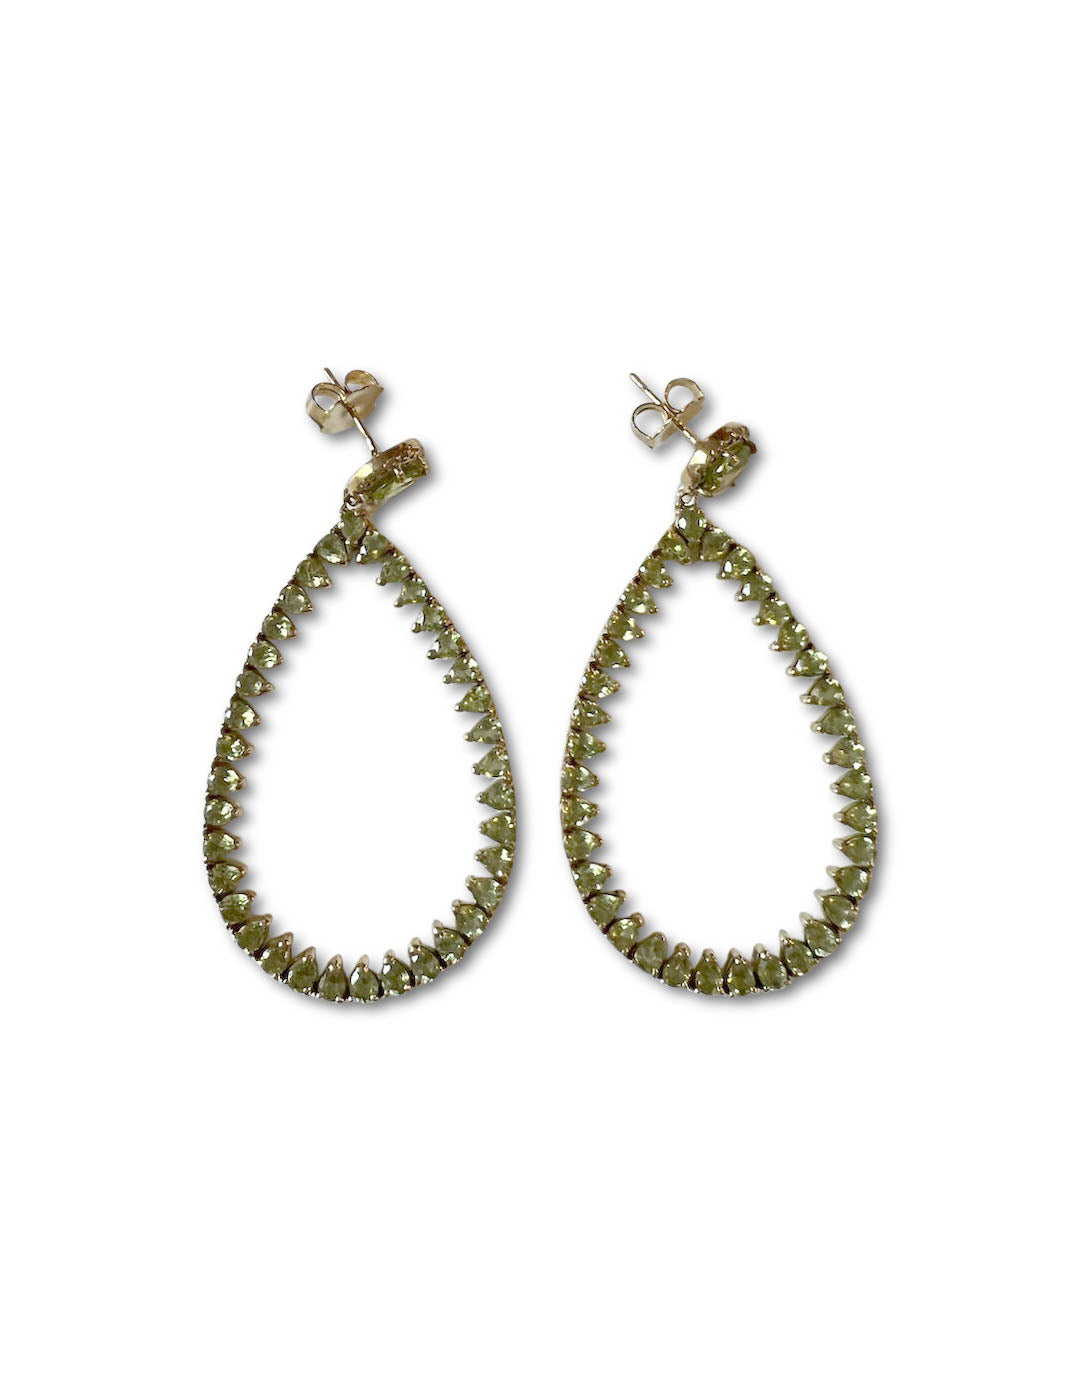 Peridot and Pave Diamond Tear Earrings set in Brass with 14kt Posts- Large